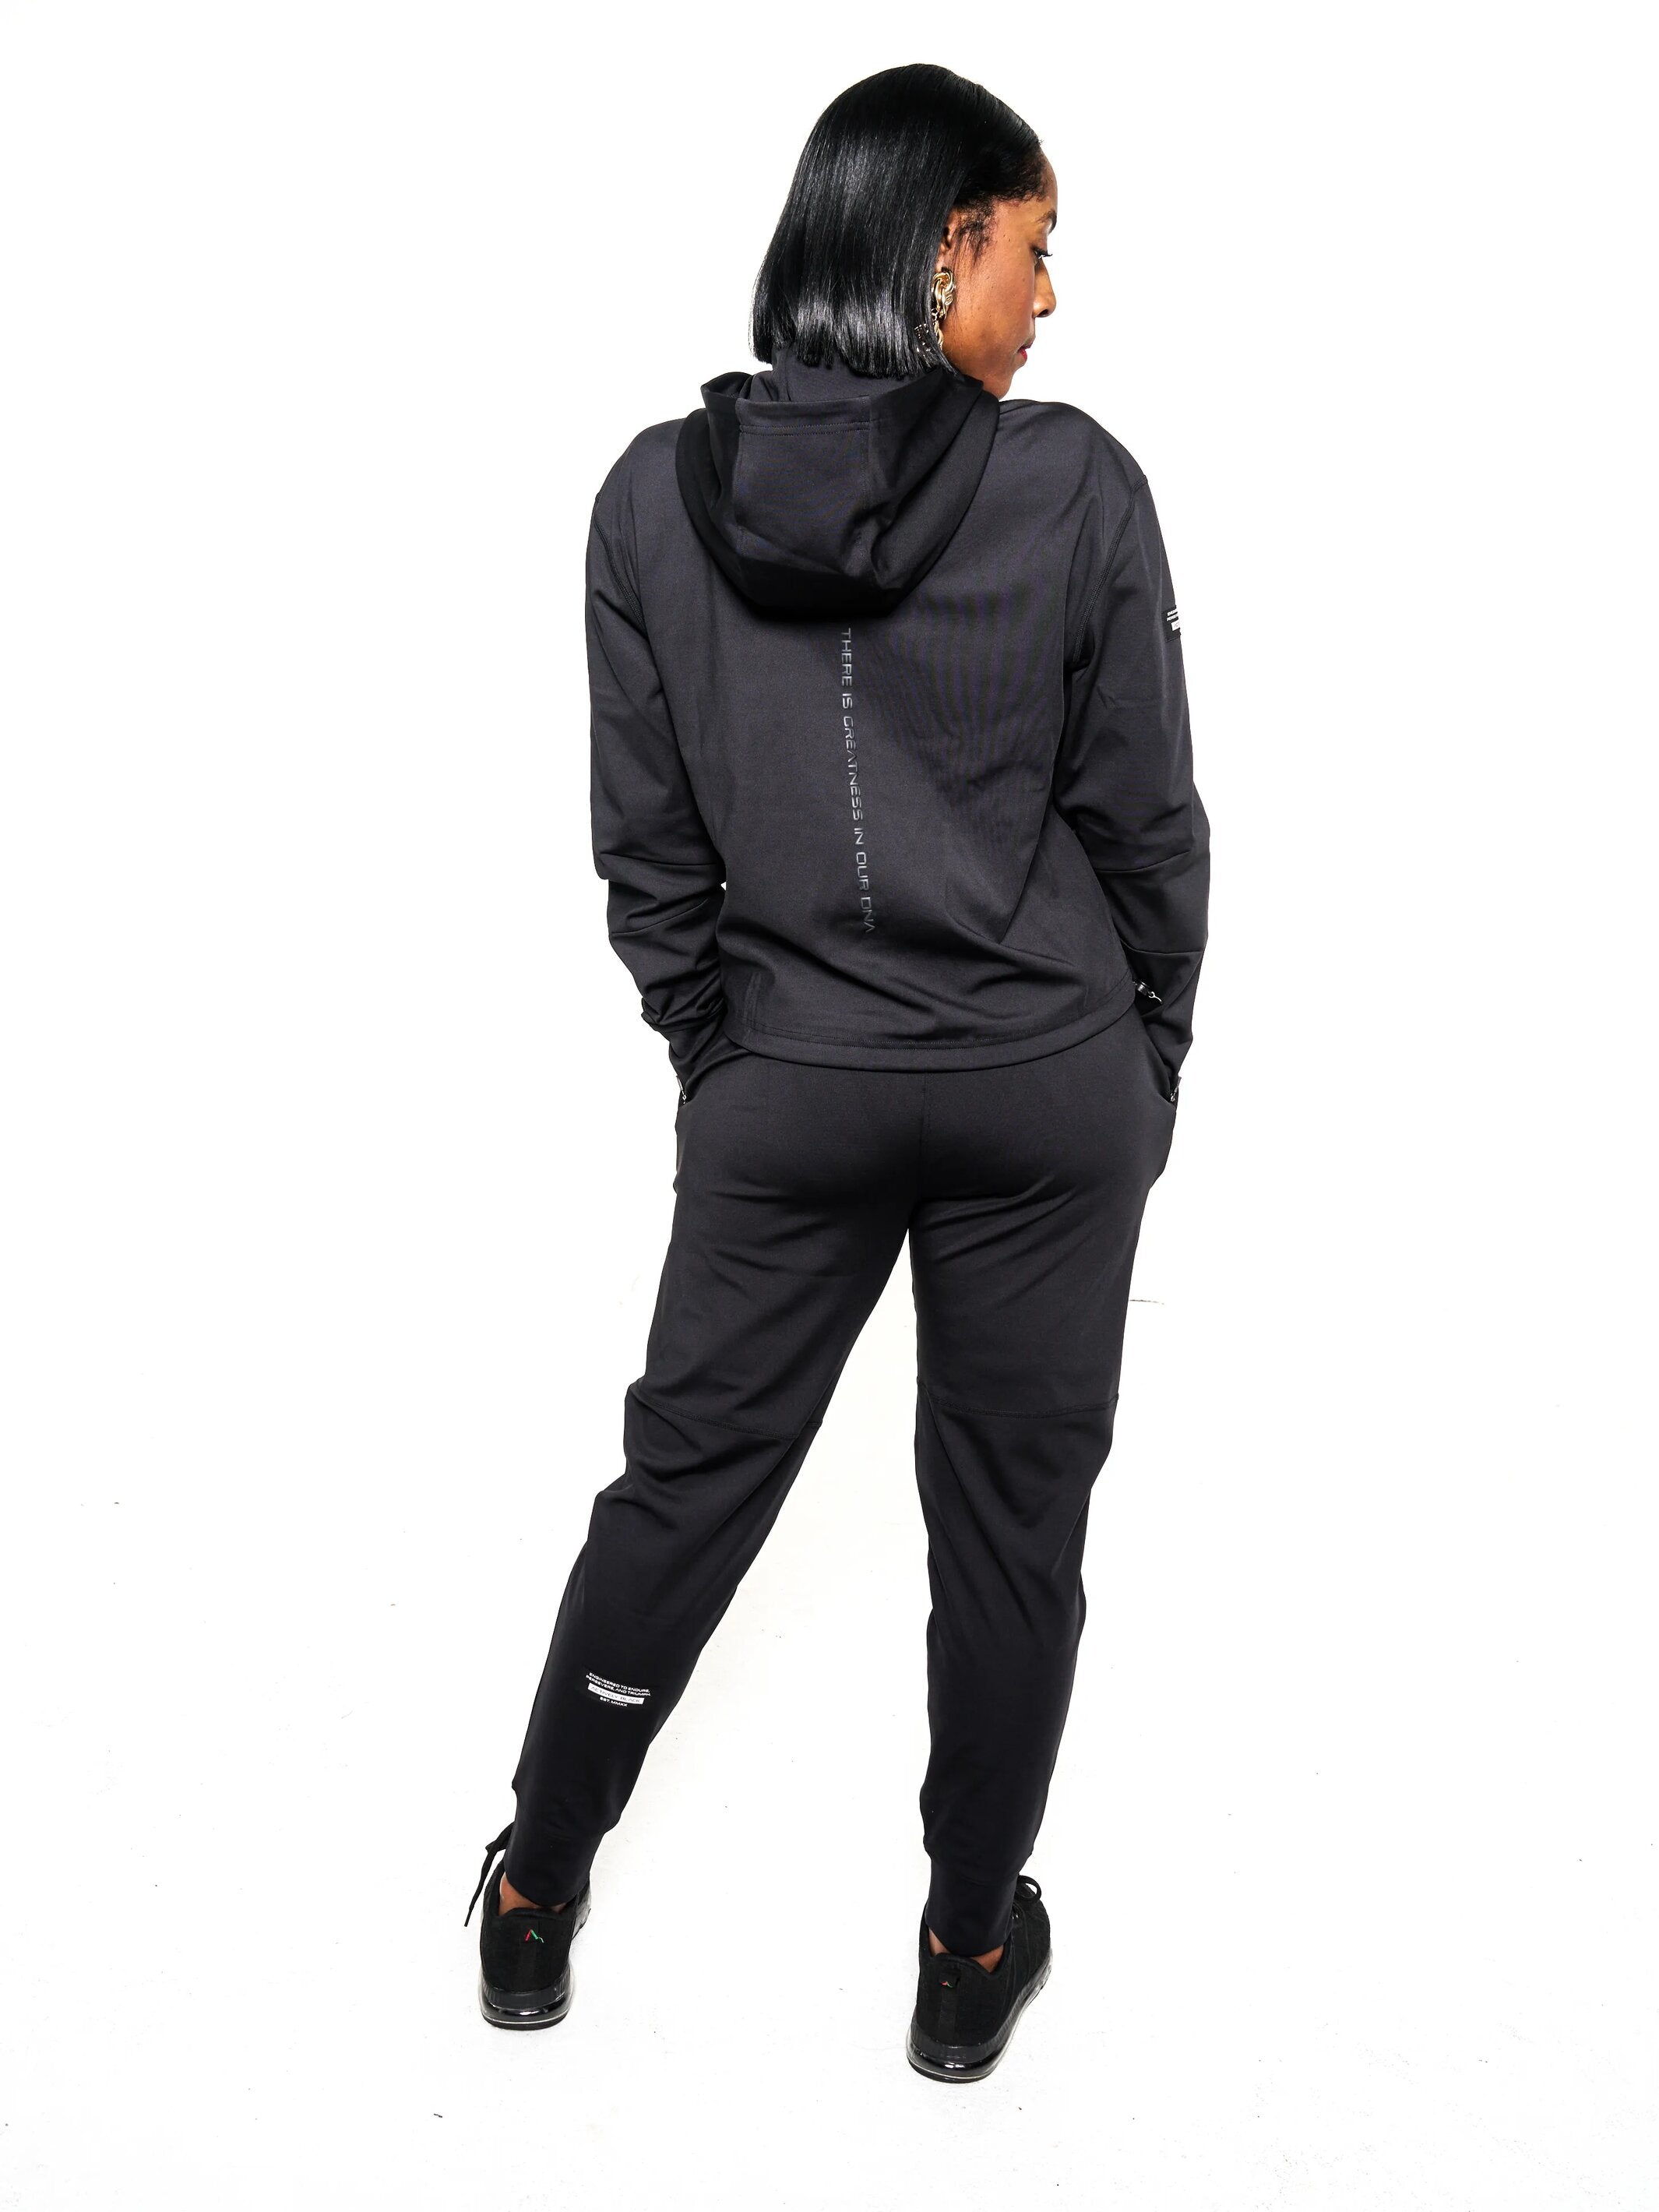 Women's Stealth Performance Joggers